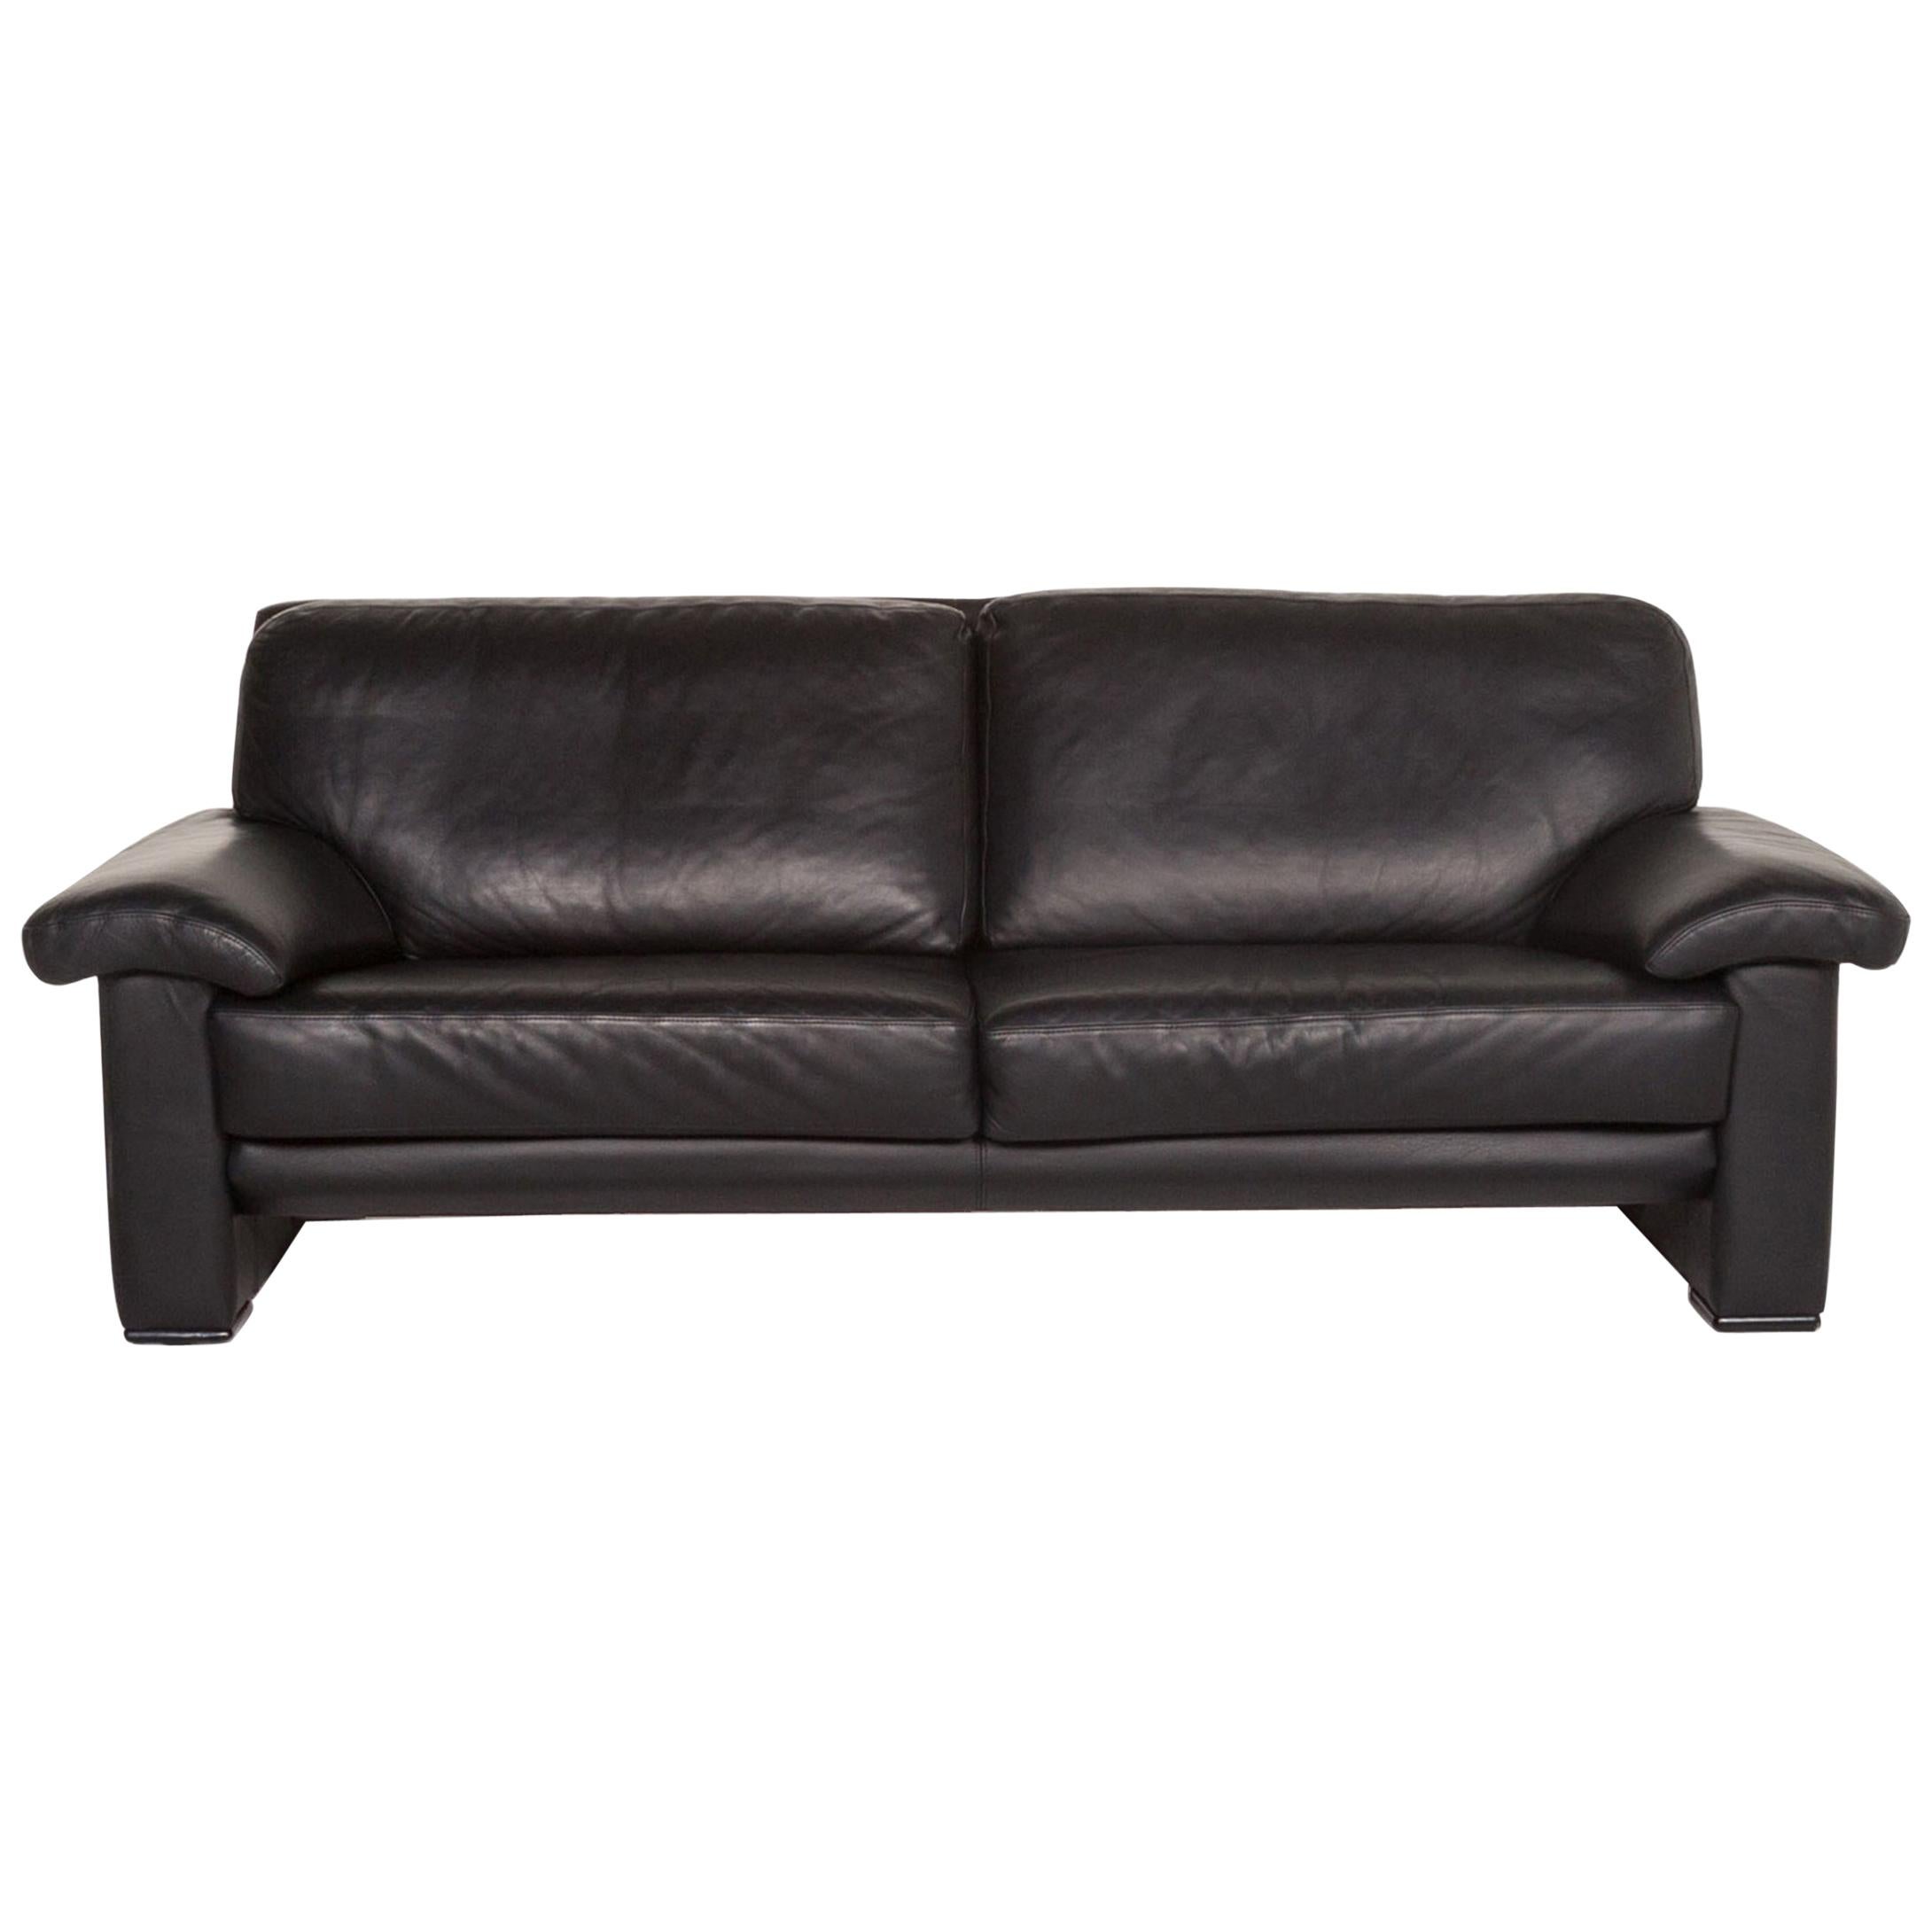 Willi Schillig Leather Sofa Black Three-Seat Couch For Sale